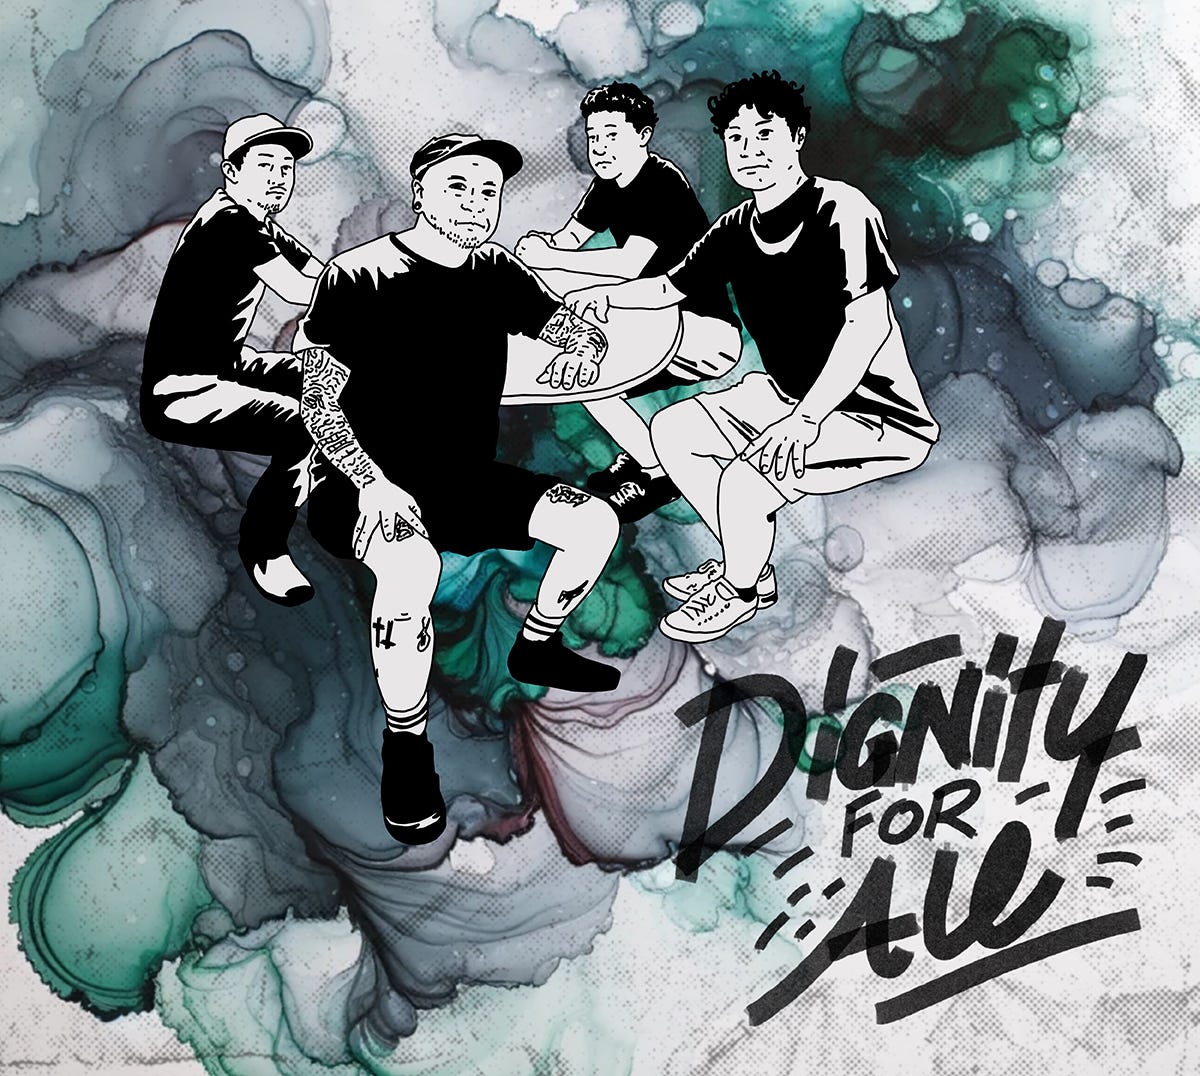 Illustration of the band Dignity For All